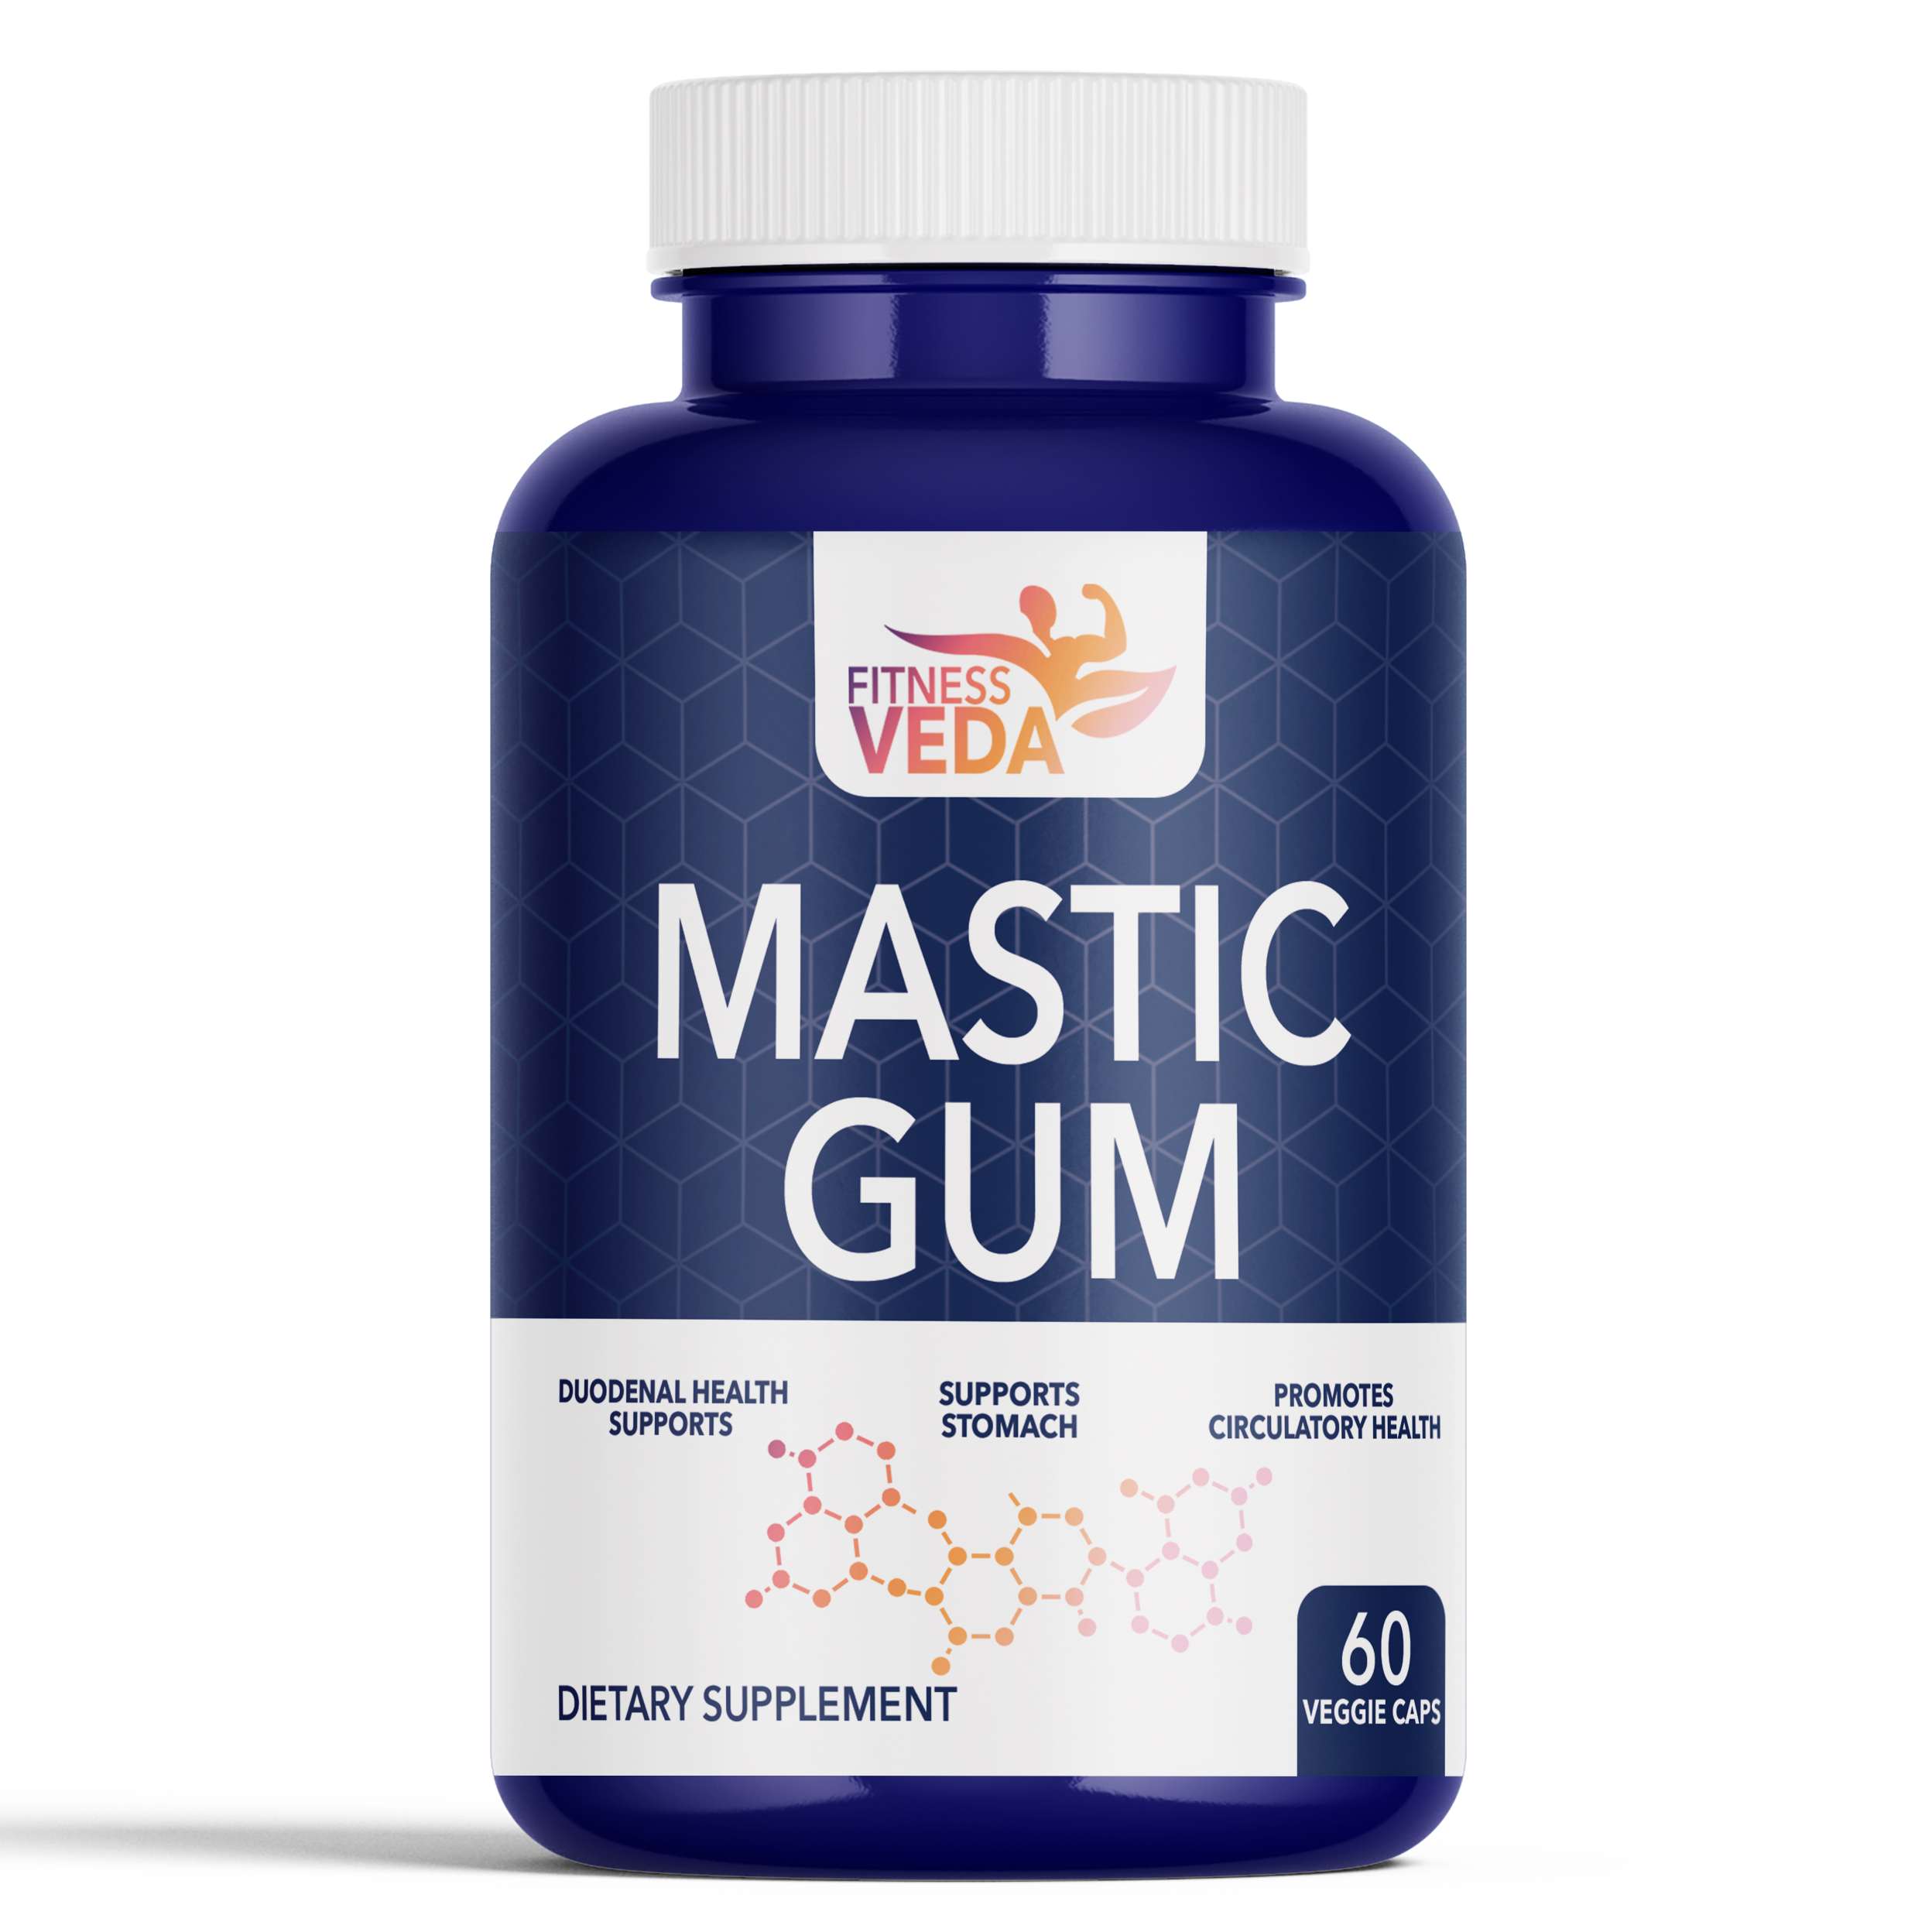 Mastic Gum: Benefits of Chewing Tree Resin